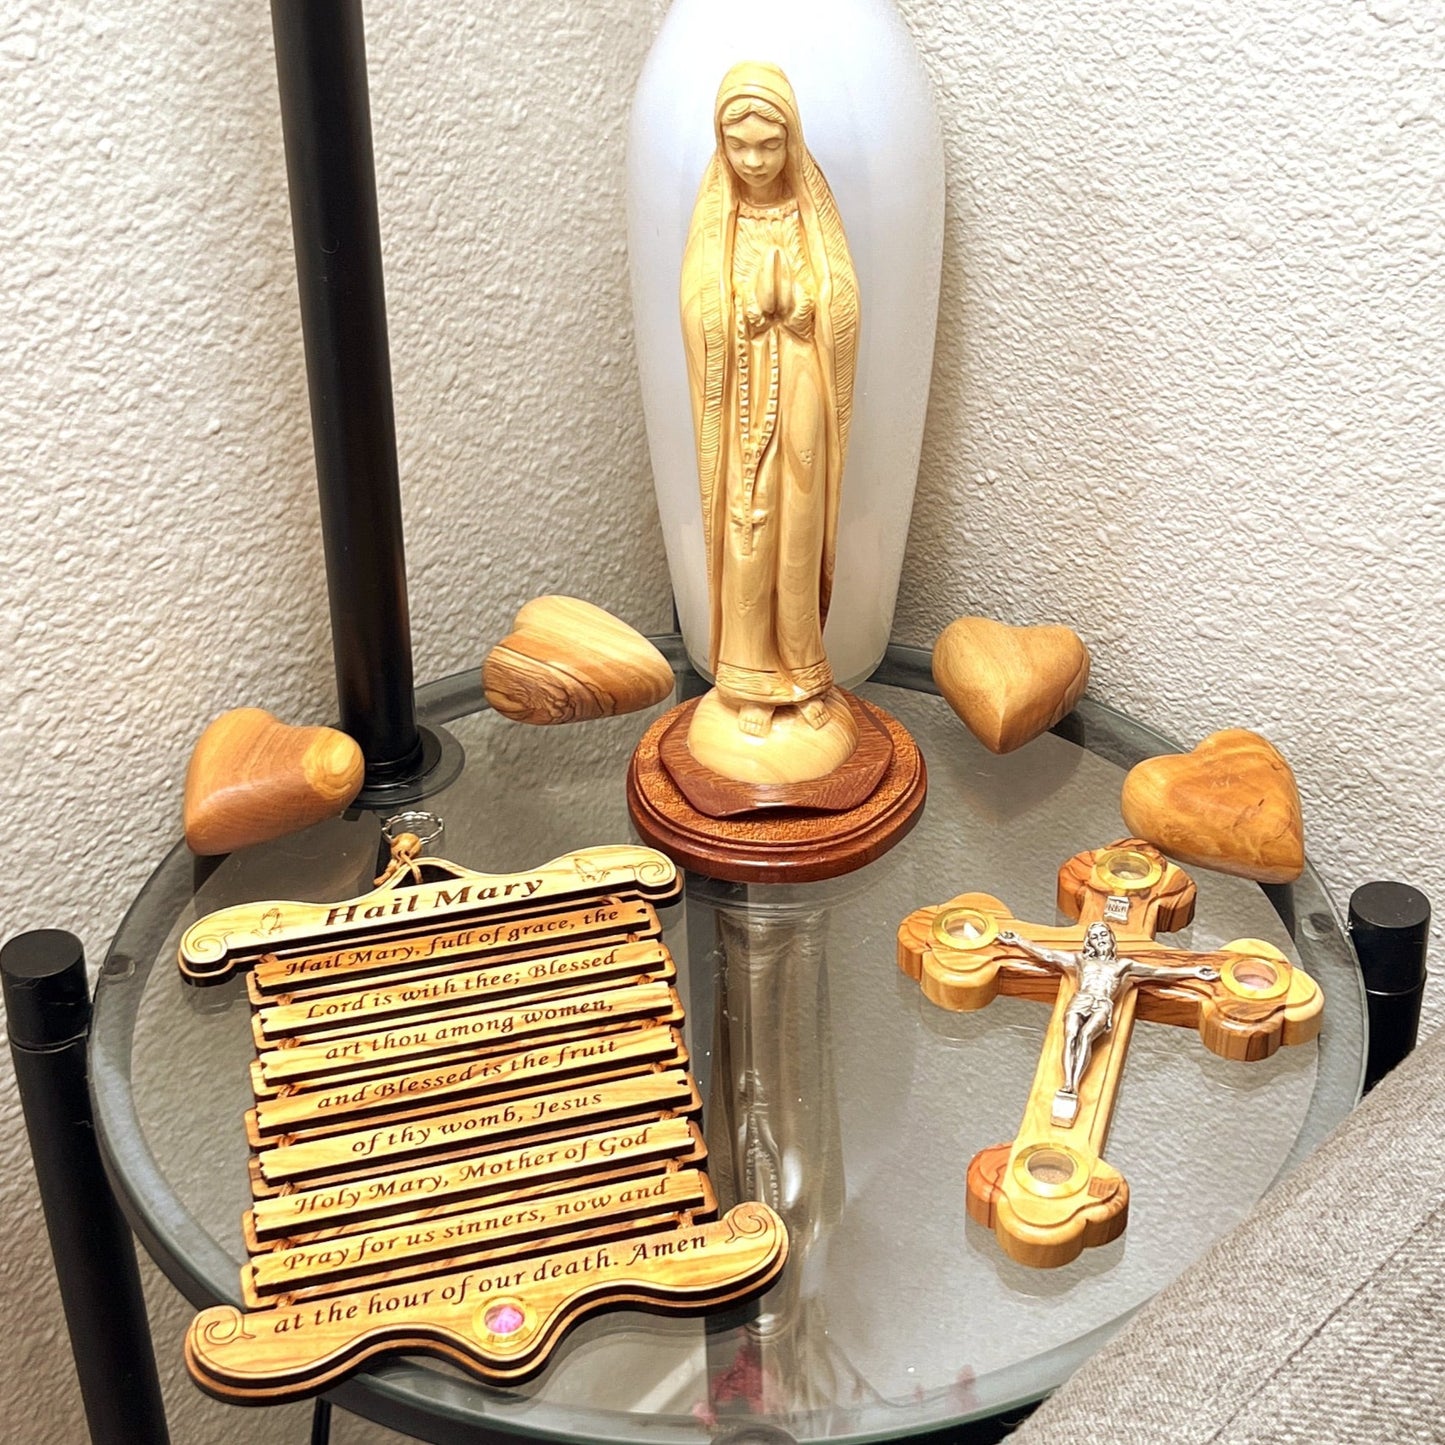 Our Hail Mary Prayer Engraved Wall Hanging in Olive Wood From Holy Land with Incense in glass capsule, with rosary and wooden hearts, Virgin Mary Statue and Crucifix of Jesus Christ 